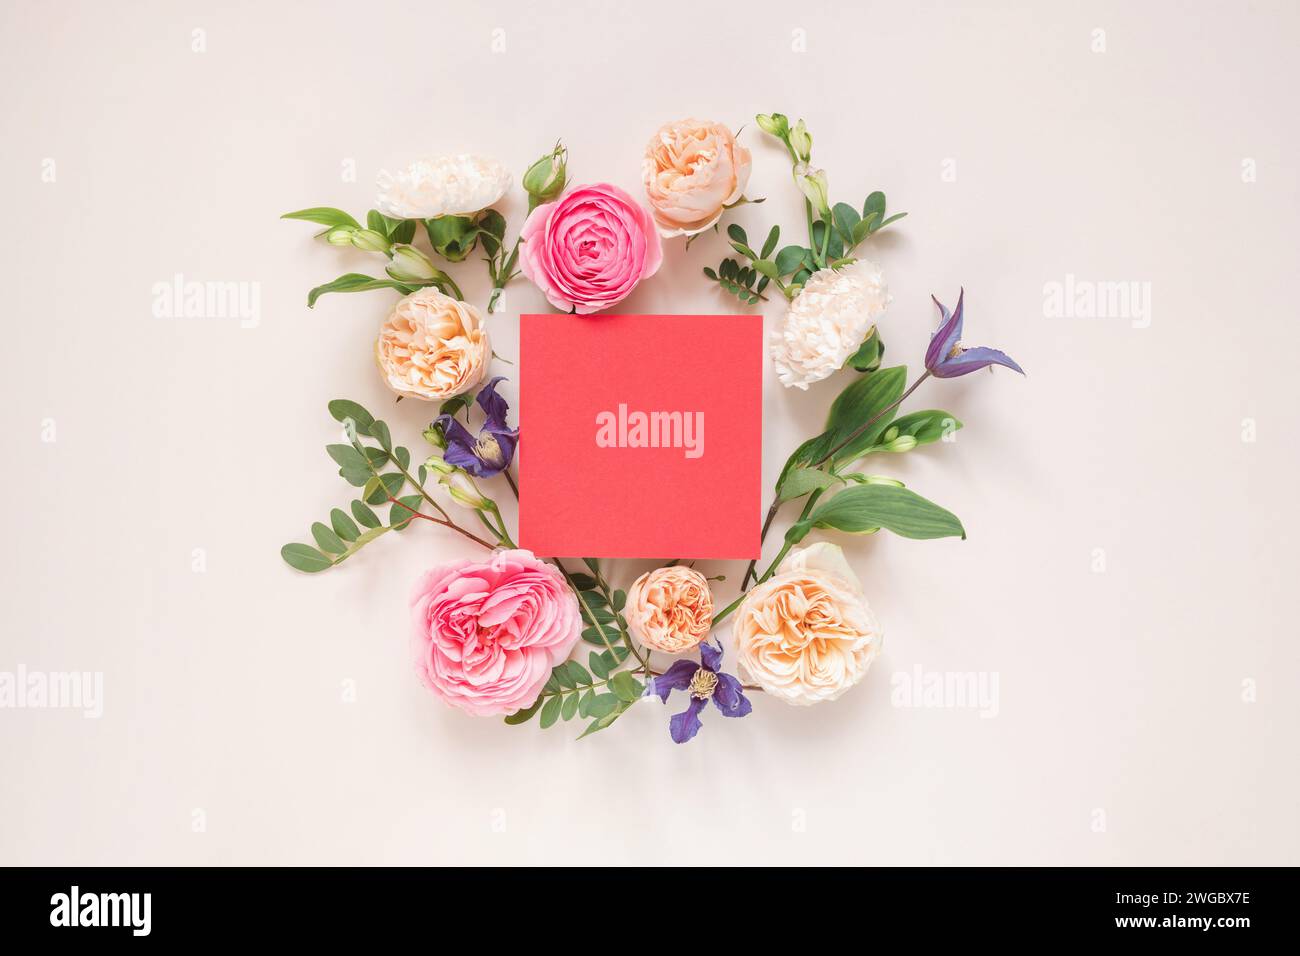 Overhead view of roses, chrysanthemums and alstroemeria flowers arranged around a blank pink card Stock Photo